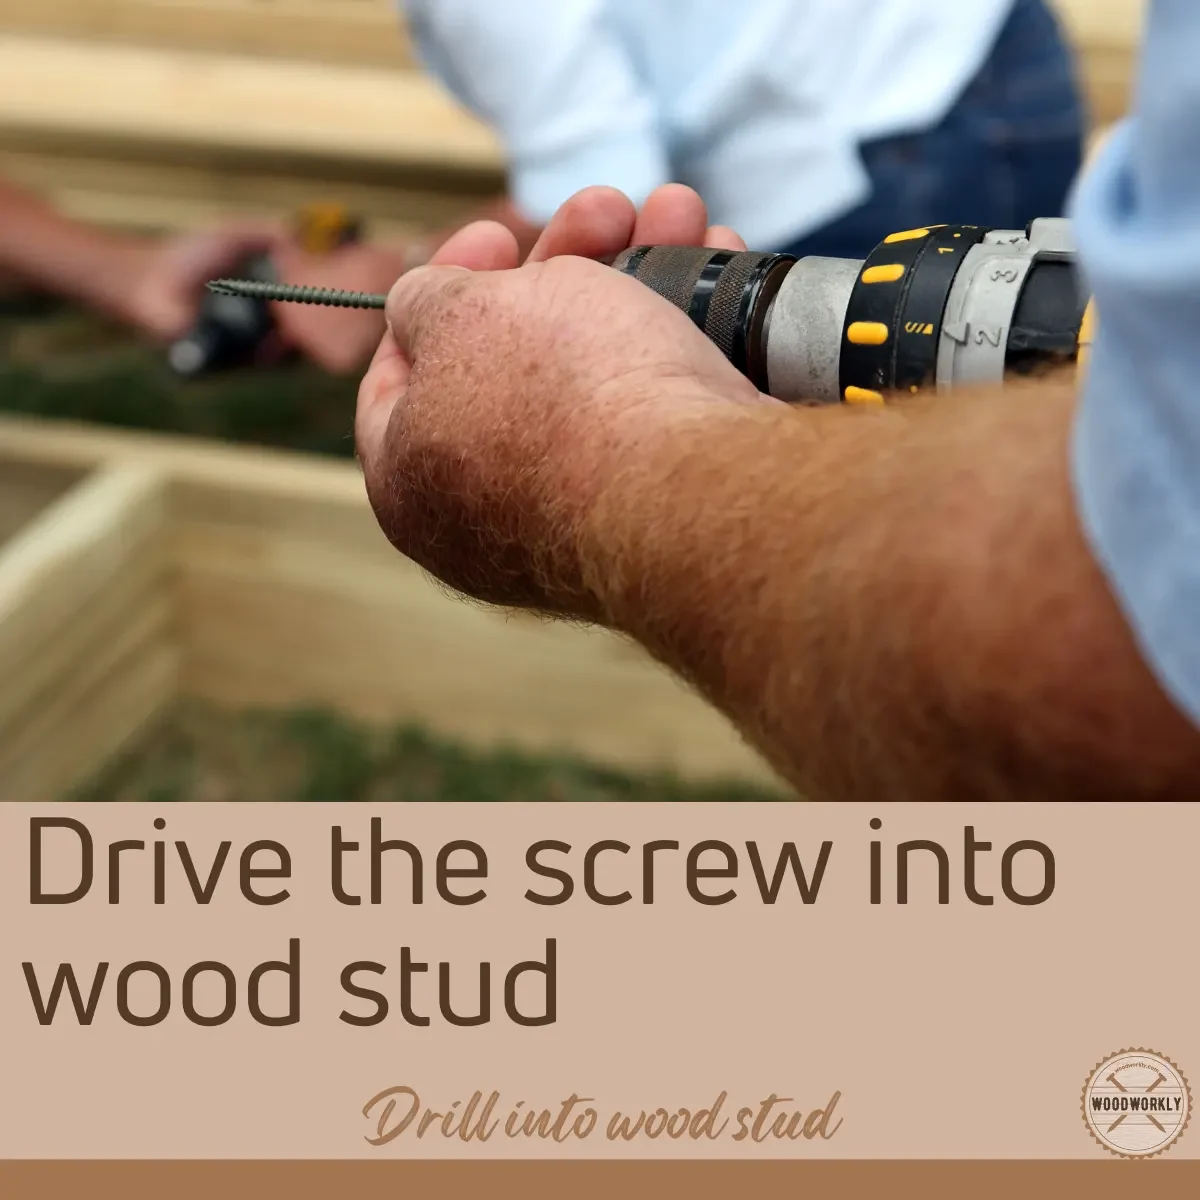 Drive the screw into wood stud